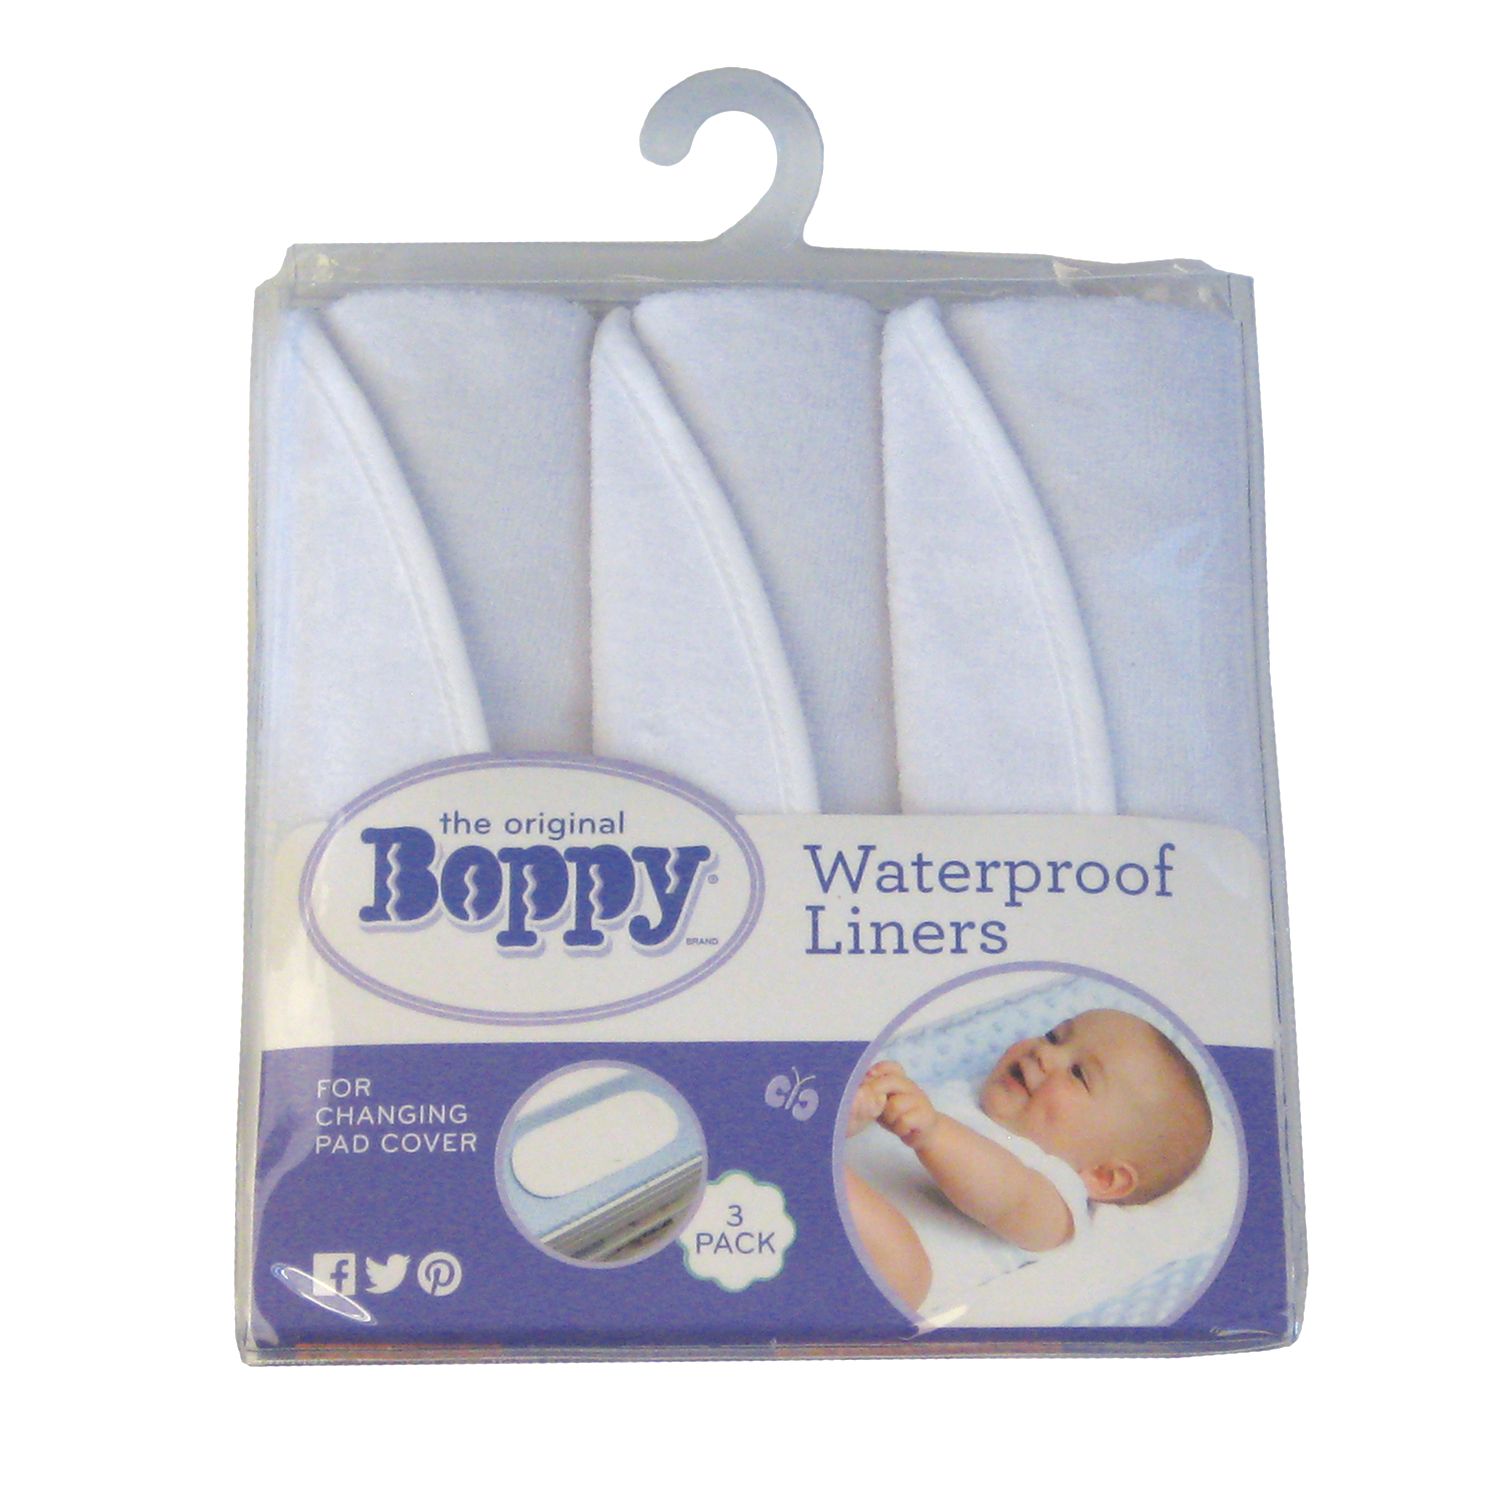  Boppy Changing Pad Liners, Pack of 3, White, Soft